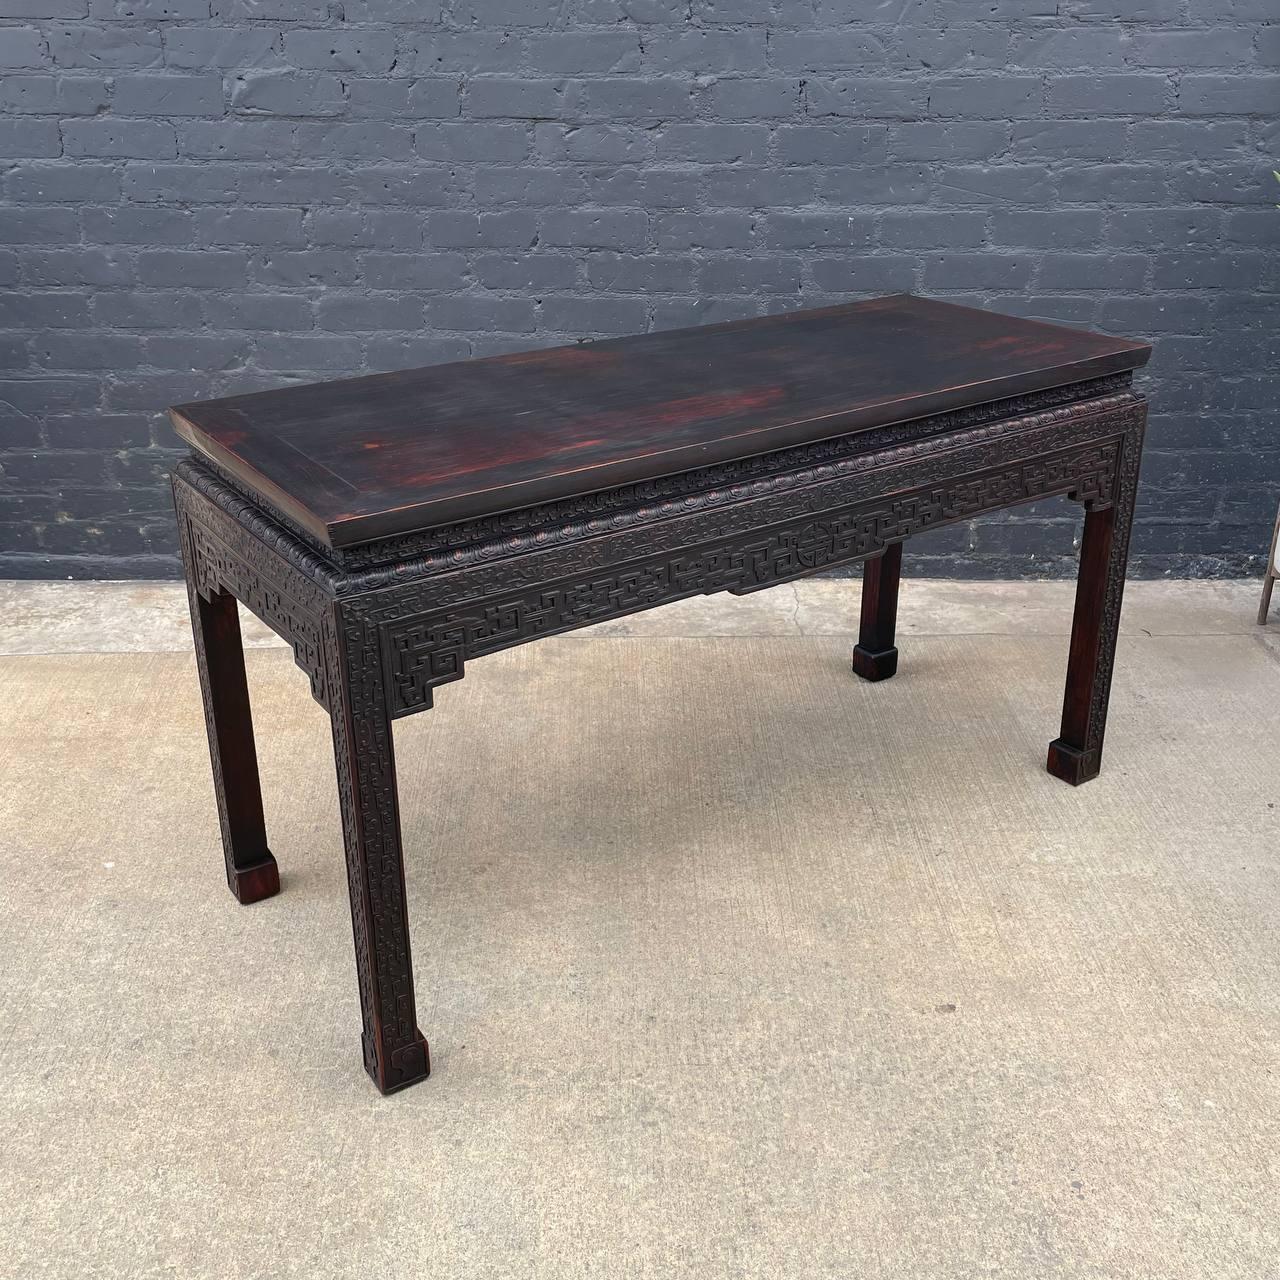 Antique Chinese hand carved wood console table.

Designer: Unknown
Country: United States
Manufacturer: Unknown
Materials: Wood
Style: Chinese Antique
Year: 1950s

$3,500

Dimensions:
34.50”H x 62”W x 24.50”D.